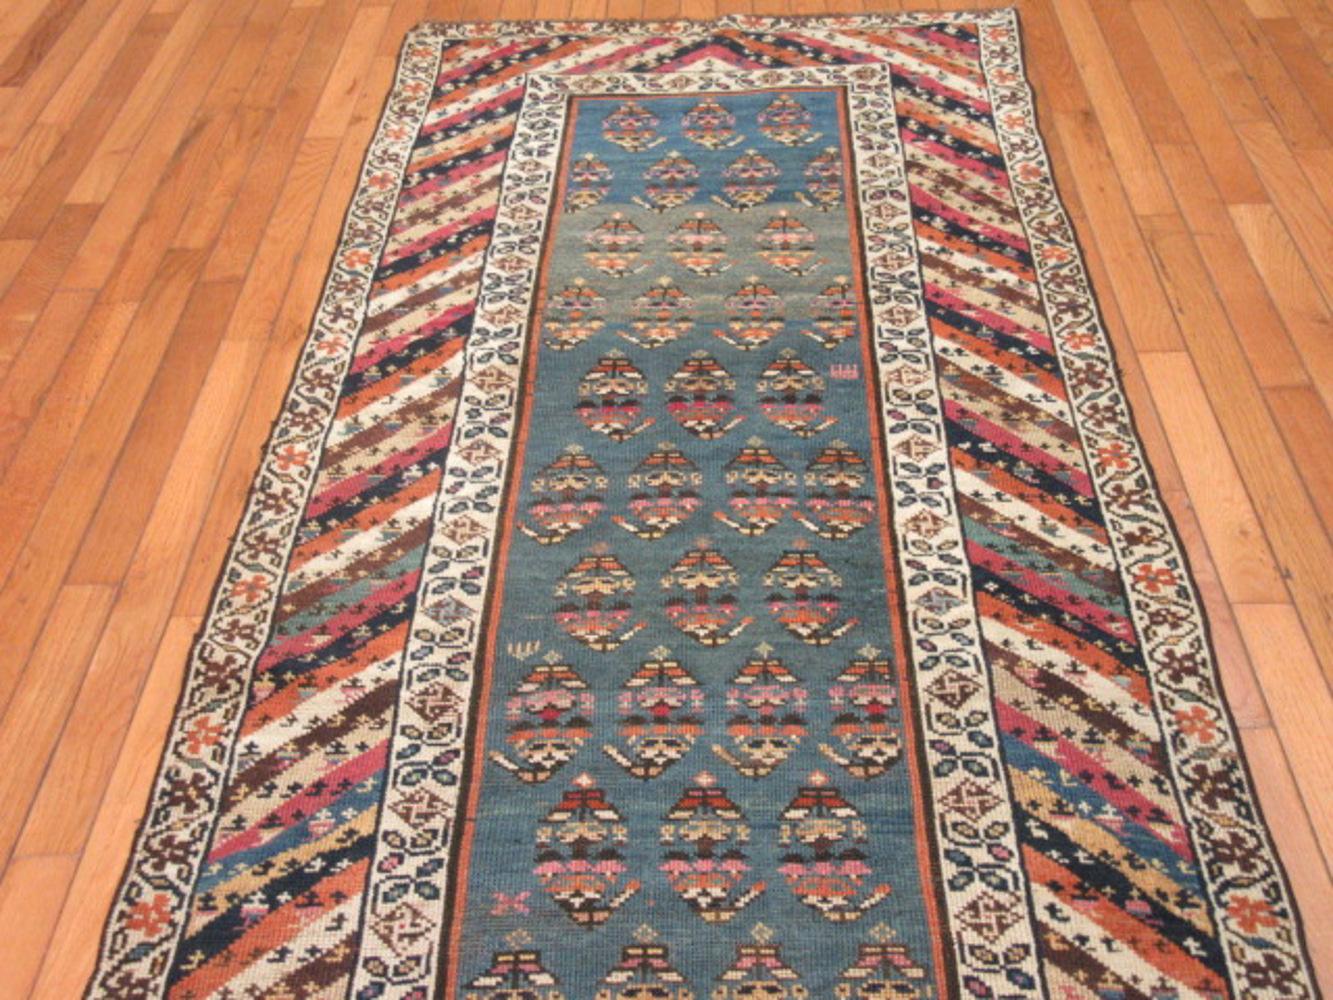 Antique Hand-Knotted Caucasian Genjeh Runner Rug In Excellent Condition For Sale In Atlanta, GA